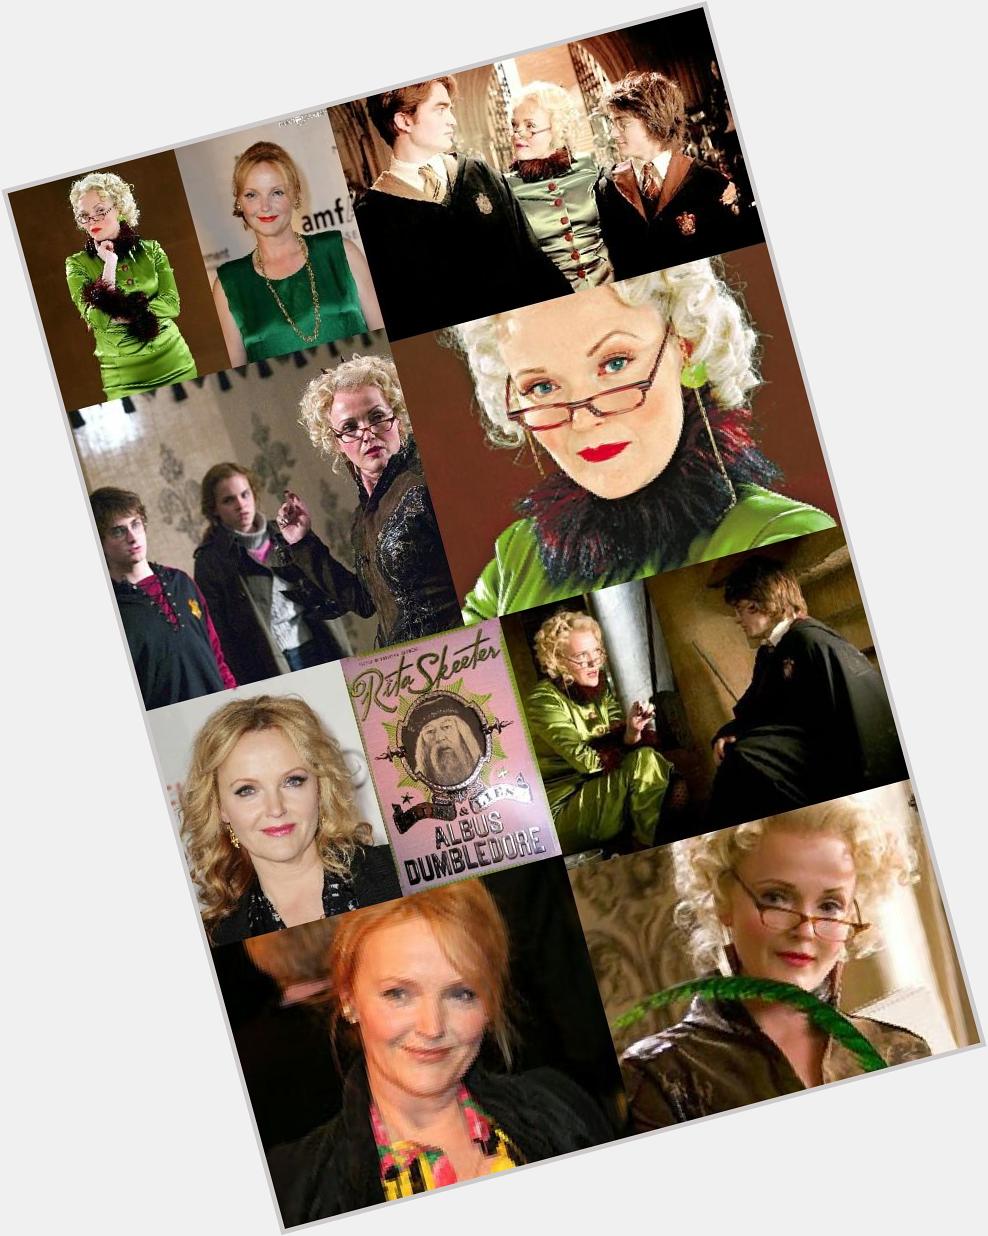 Happy birthday to Miranda Richardson who plays Rita Skeeter in and the goblet of fire  